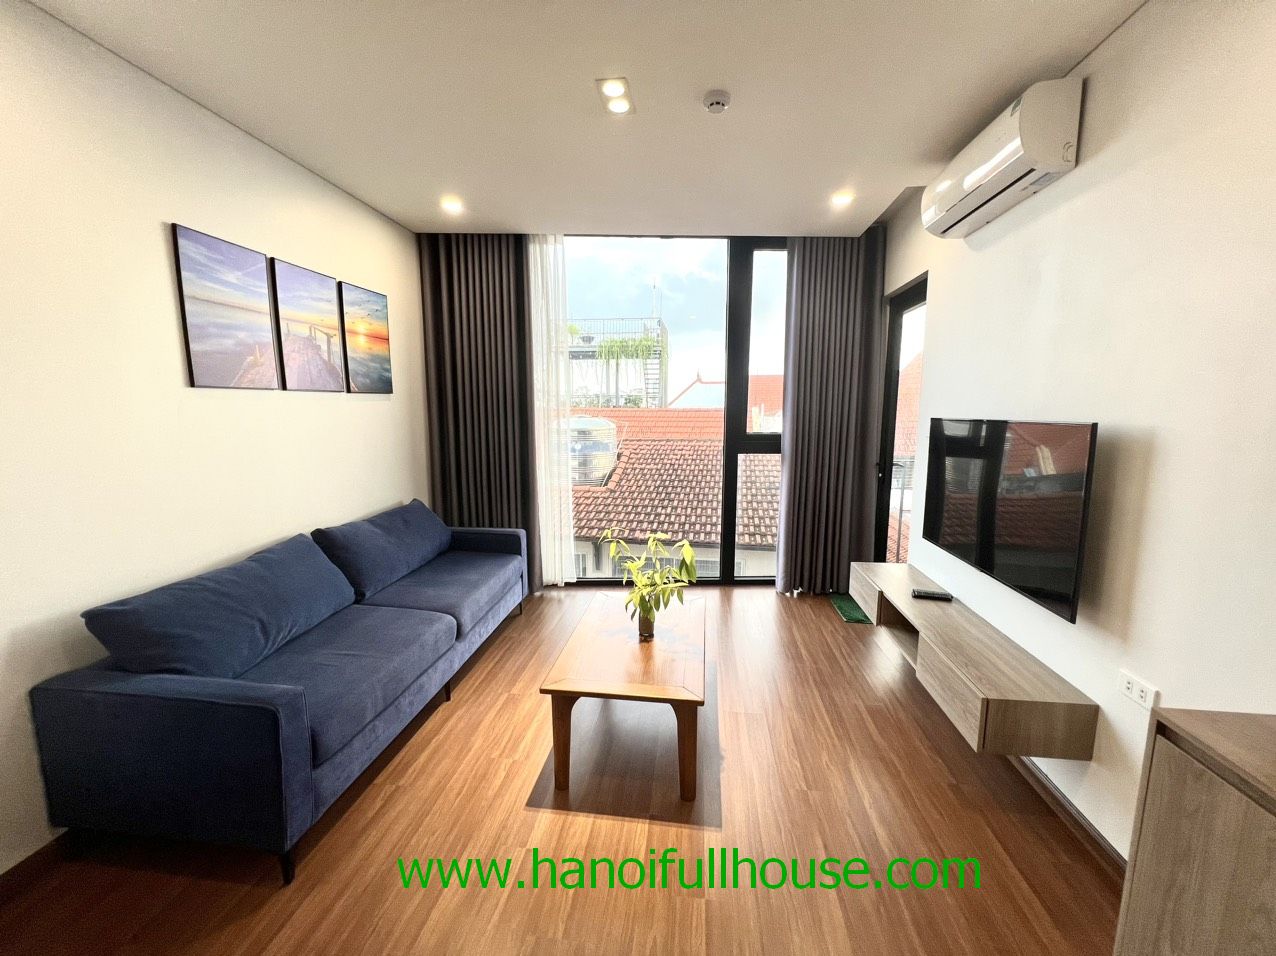 1 bedroom apartment, fully furnished in serviced apartment building